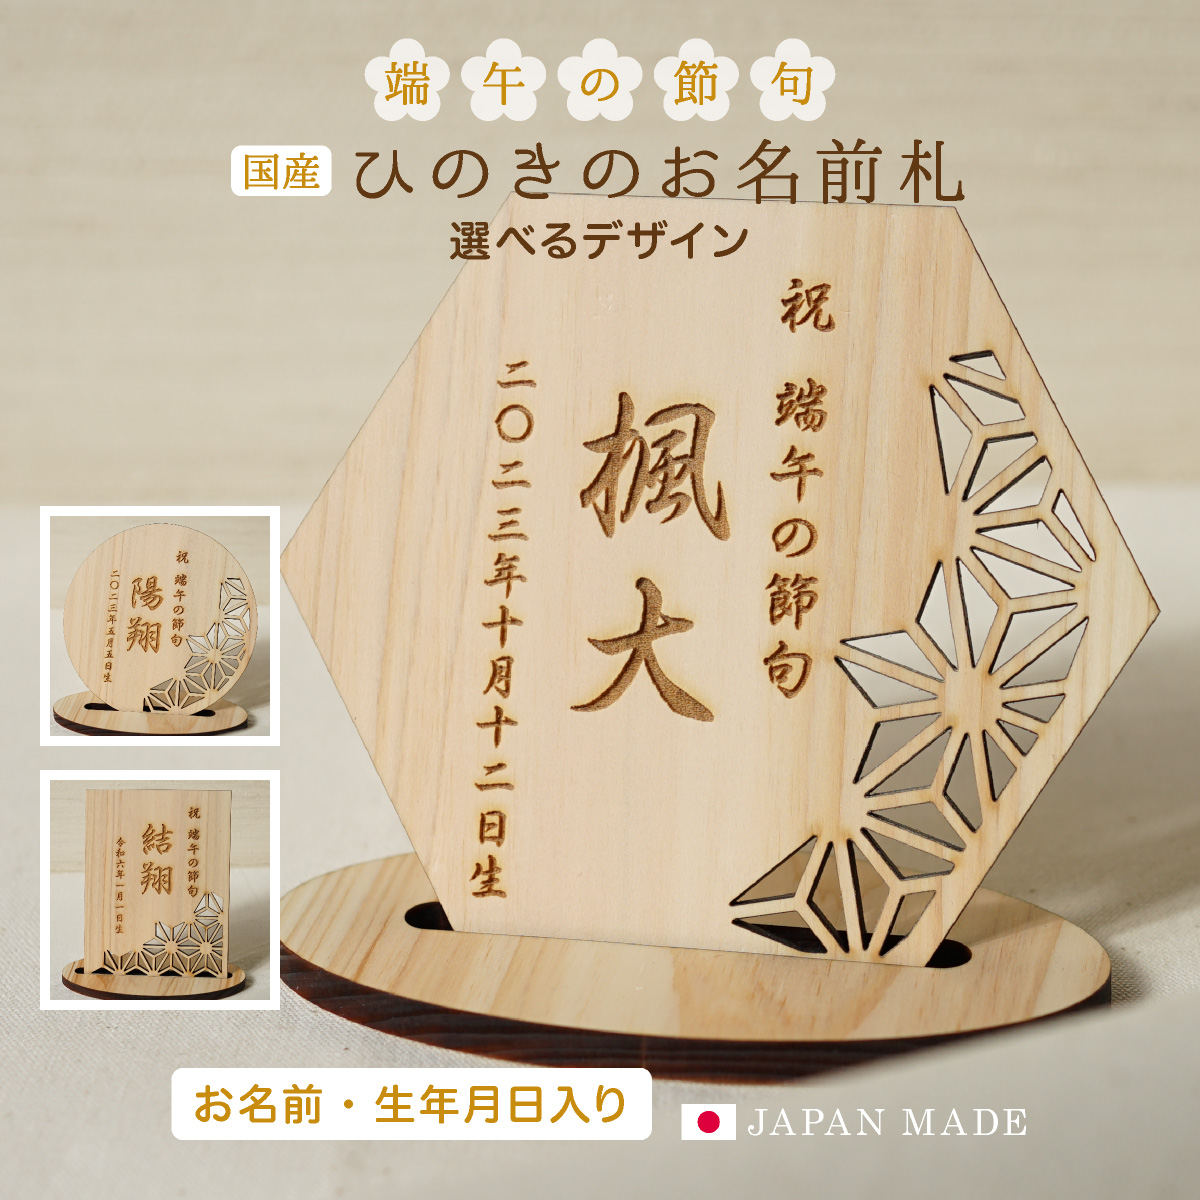  edge .. .. name . tree wooden helmet decoration Boys' May Festival dolls name .. thing day the first .... decoration .. . tree . life name paper Japanese domestic production stylish simple np0007